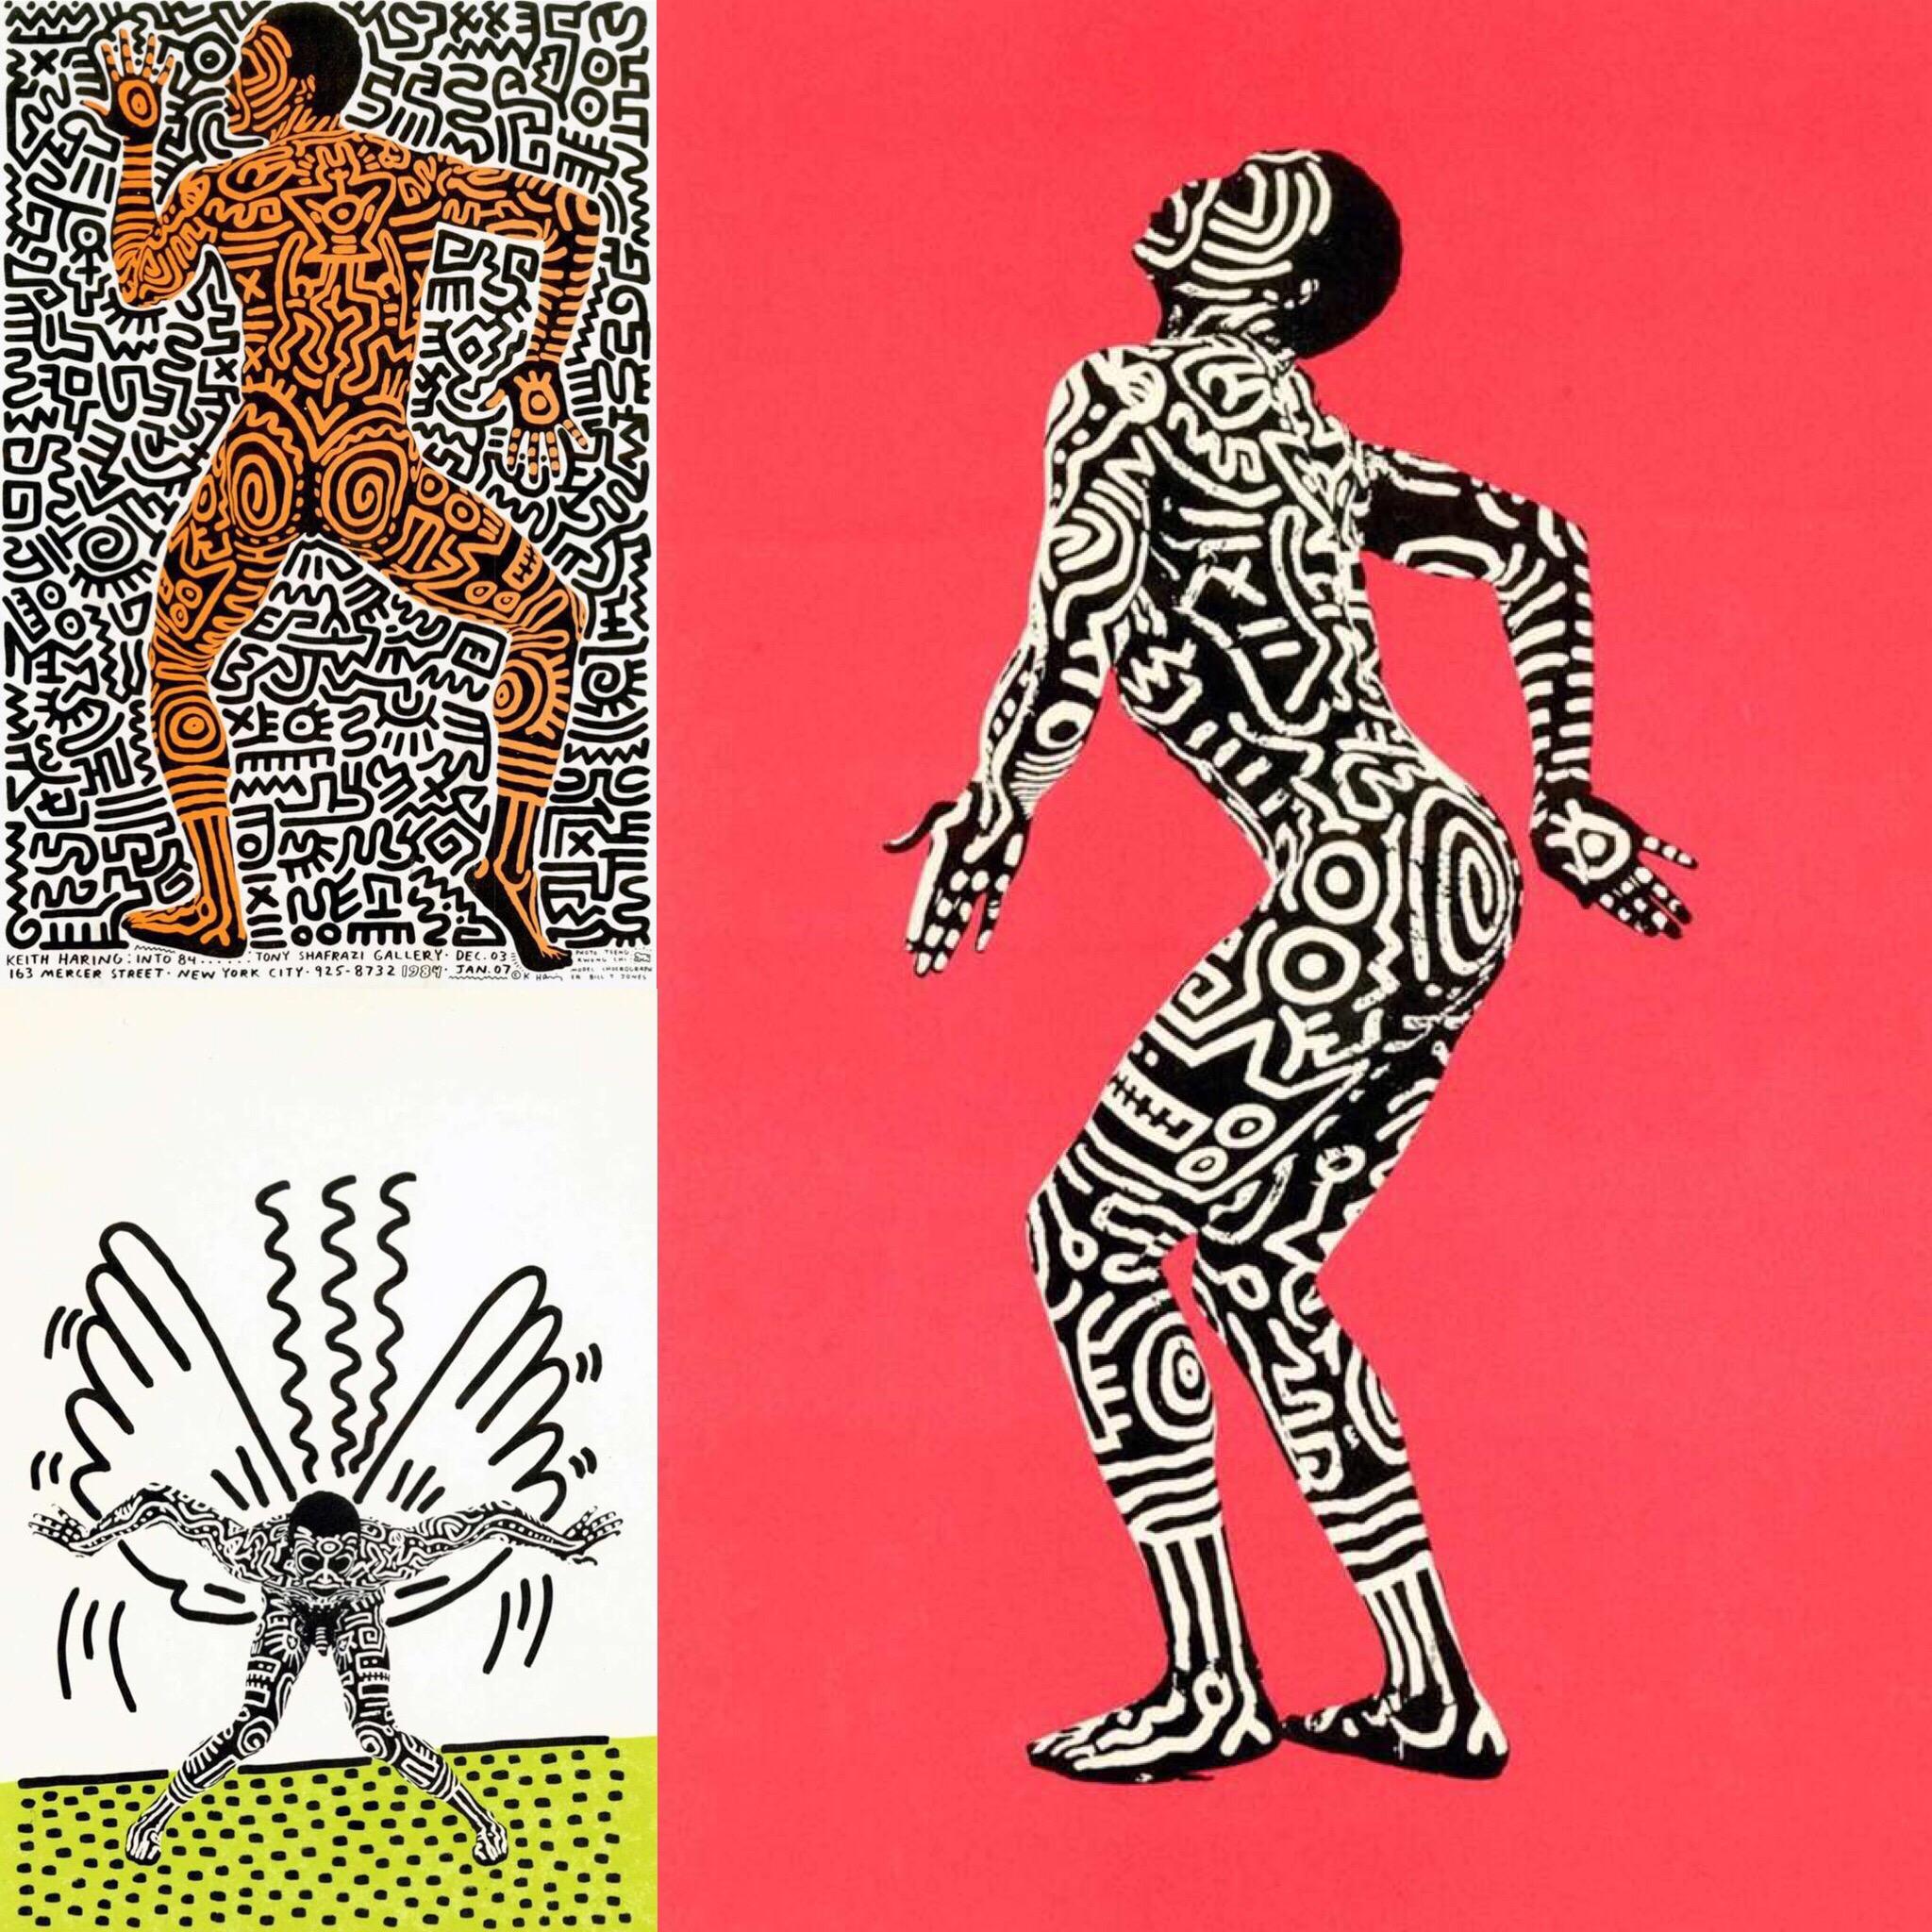 Keith Haring Into 84 (Haring Bill T. Jones announcement cards 1983)   1